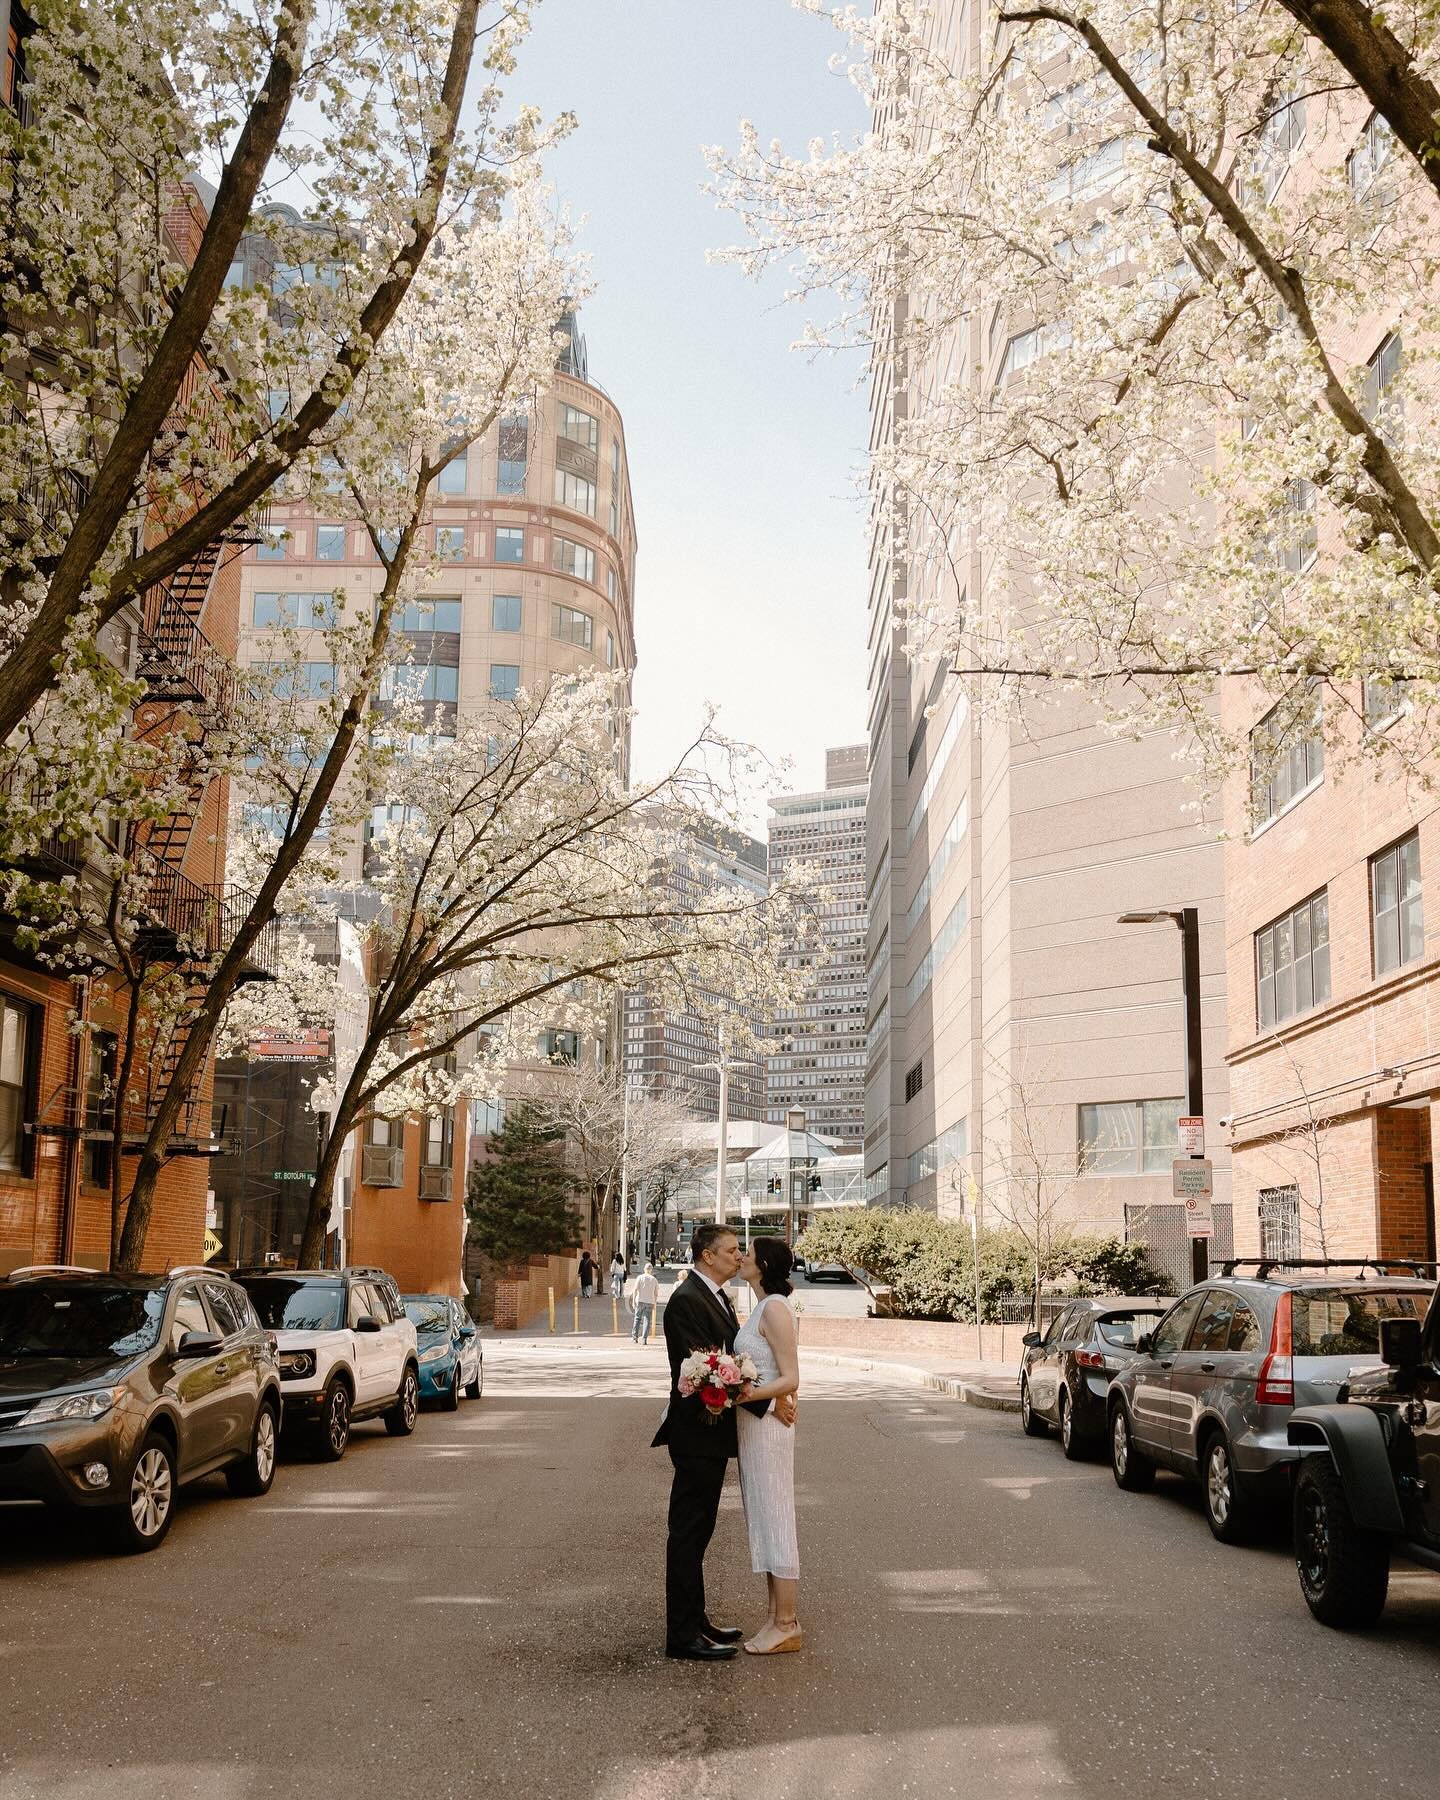 The most perfect photo that represents love and spring in Boston 🩷🌿

📷: @ninaweinsteinphotography 
💐: @glorias_blooms 

  #bostonwedding #springtime #cherryblossoms #springwedding #thecity #springisintheair #love